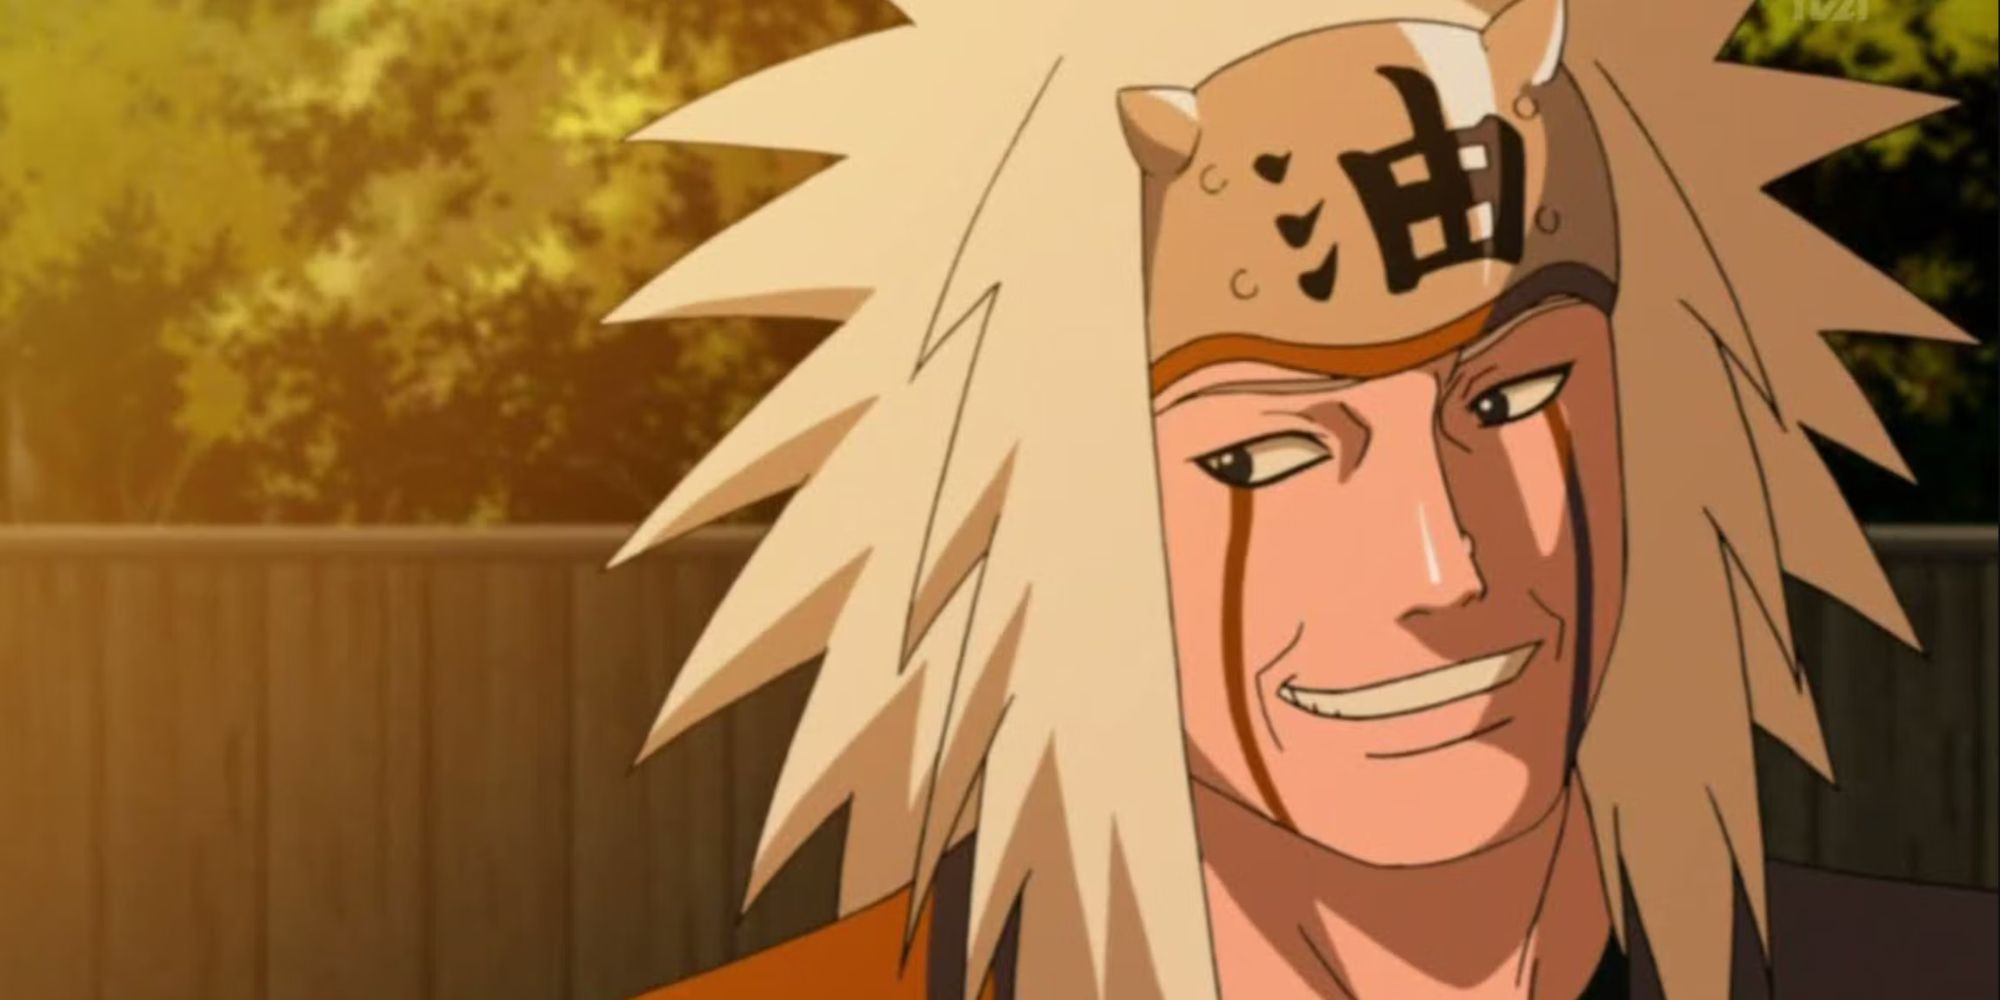 Screenshot of Jiraiya smiling in the sunlight in Naruto Shippuden anime as he says goodbye to Tsunade for the last time.